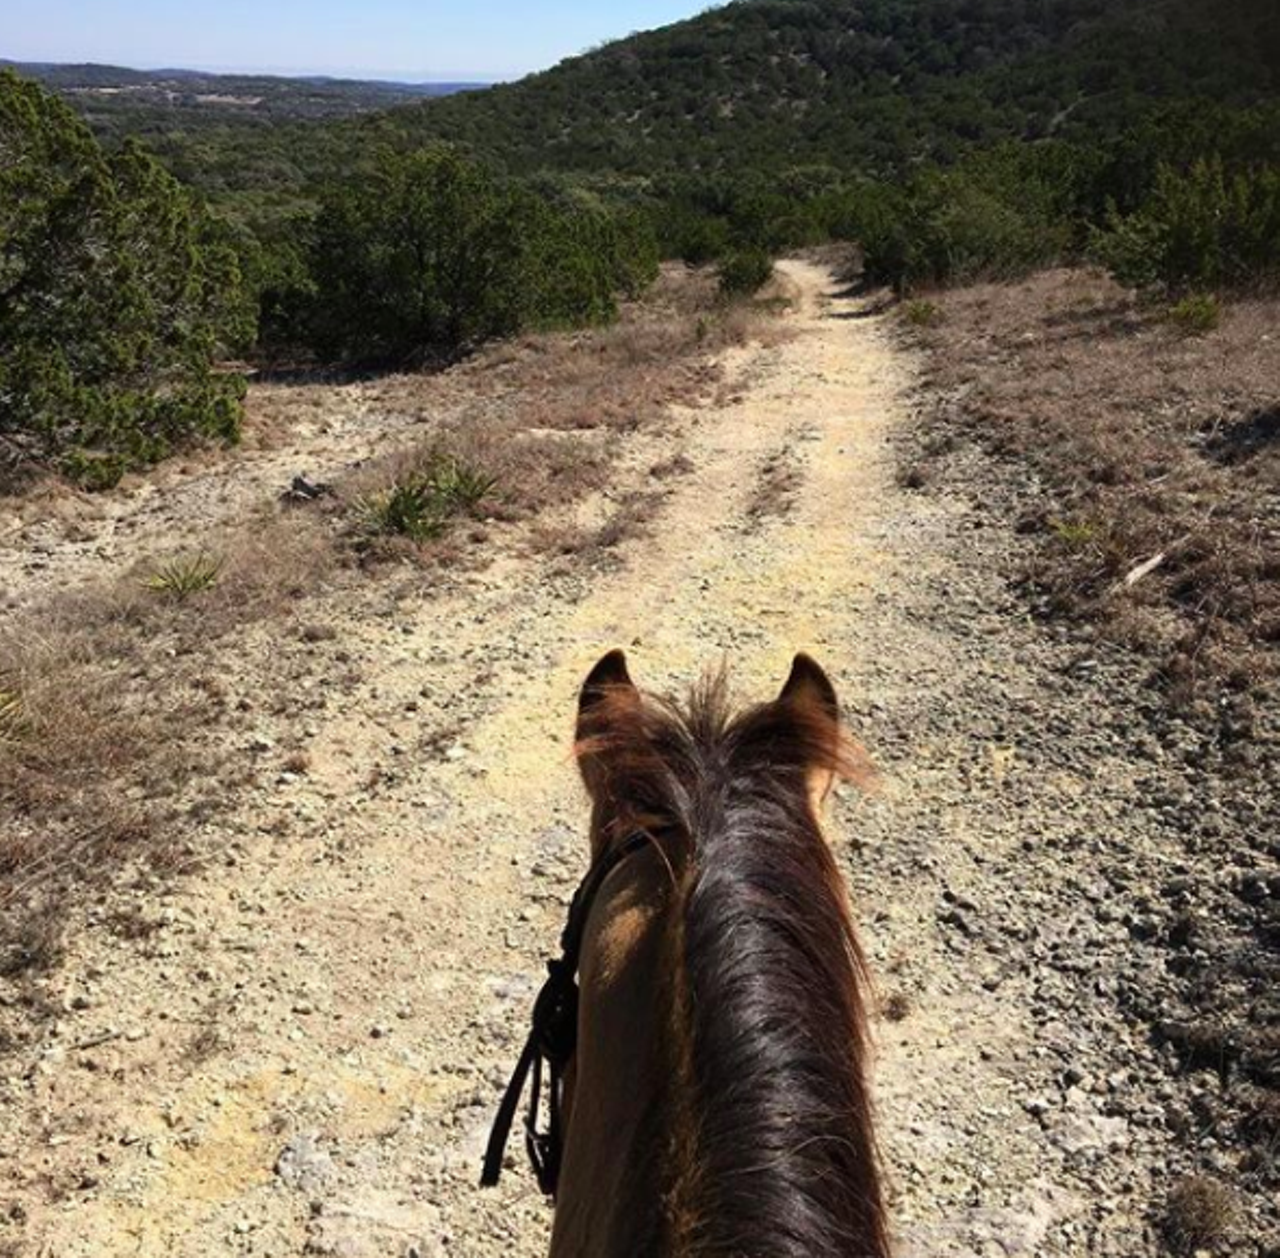 Hill Country State Natural Area
10600 Bandera Creek Rd, Bandera, (830) 796-4413, tpwd.texas.gov
Plan accordingly so you can take advantage of 40+ miles of multiuse trails. You can hike, bike and even ride a horse along these designated paths.
Photo via Instagram / banderahistorical